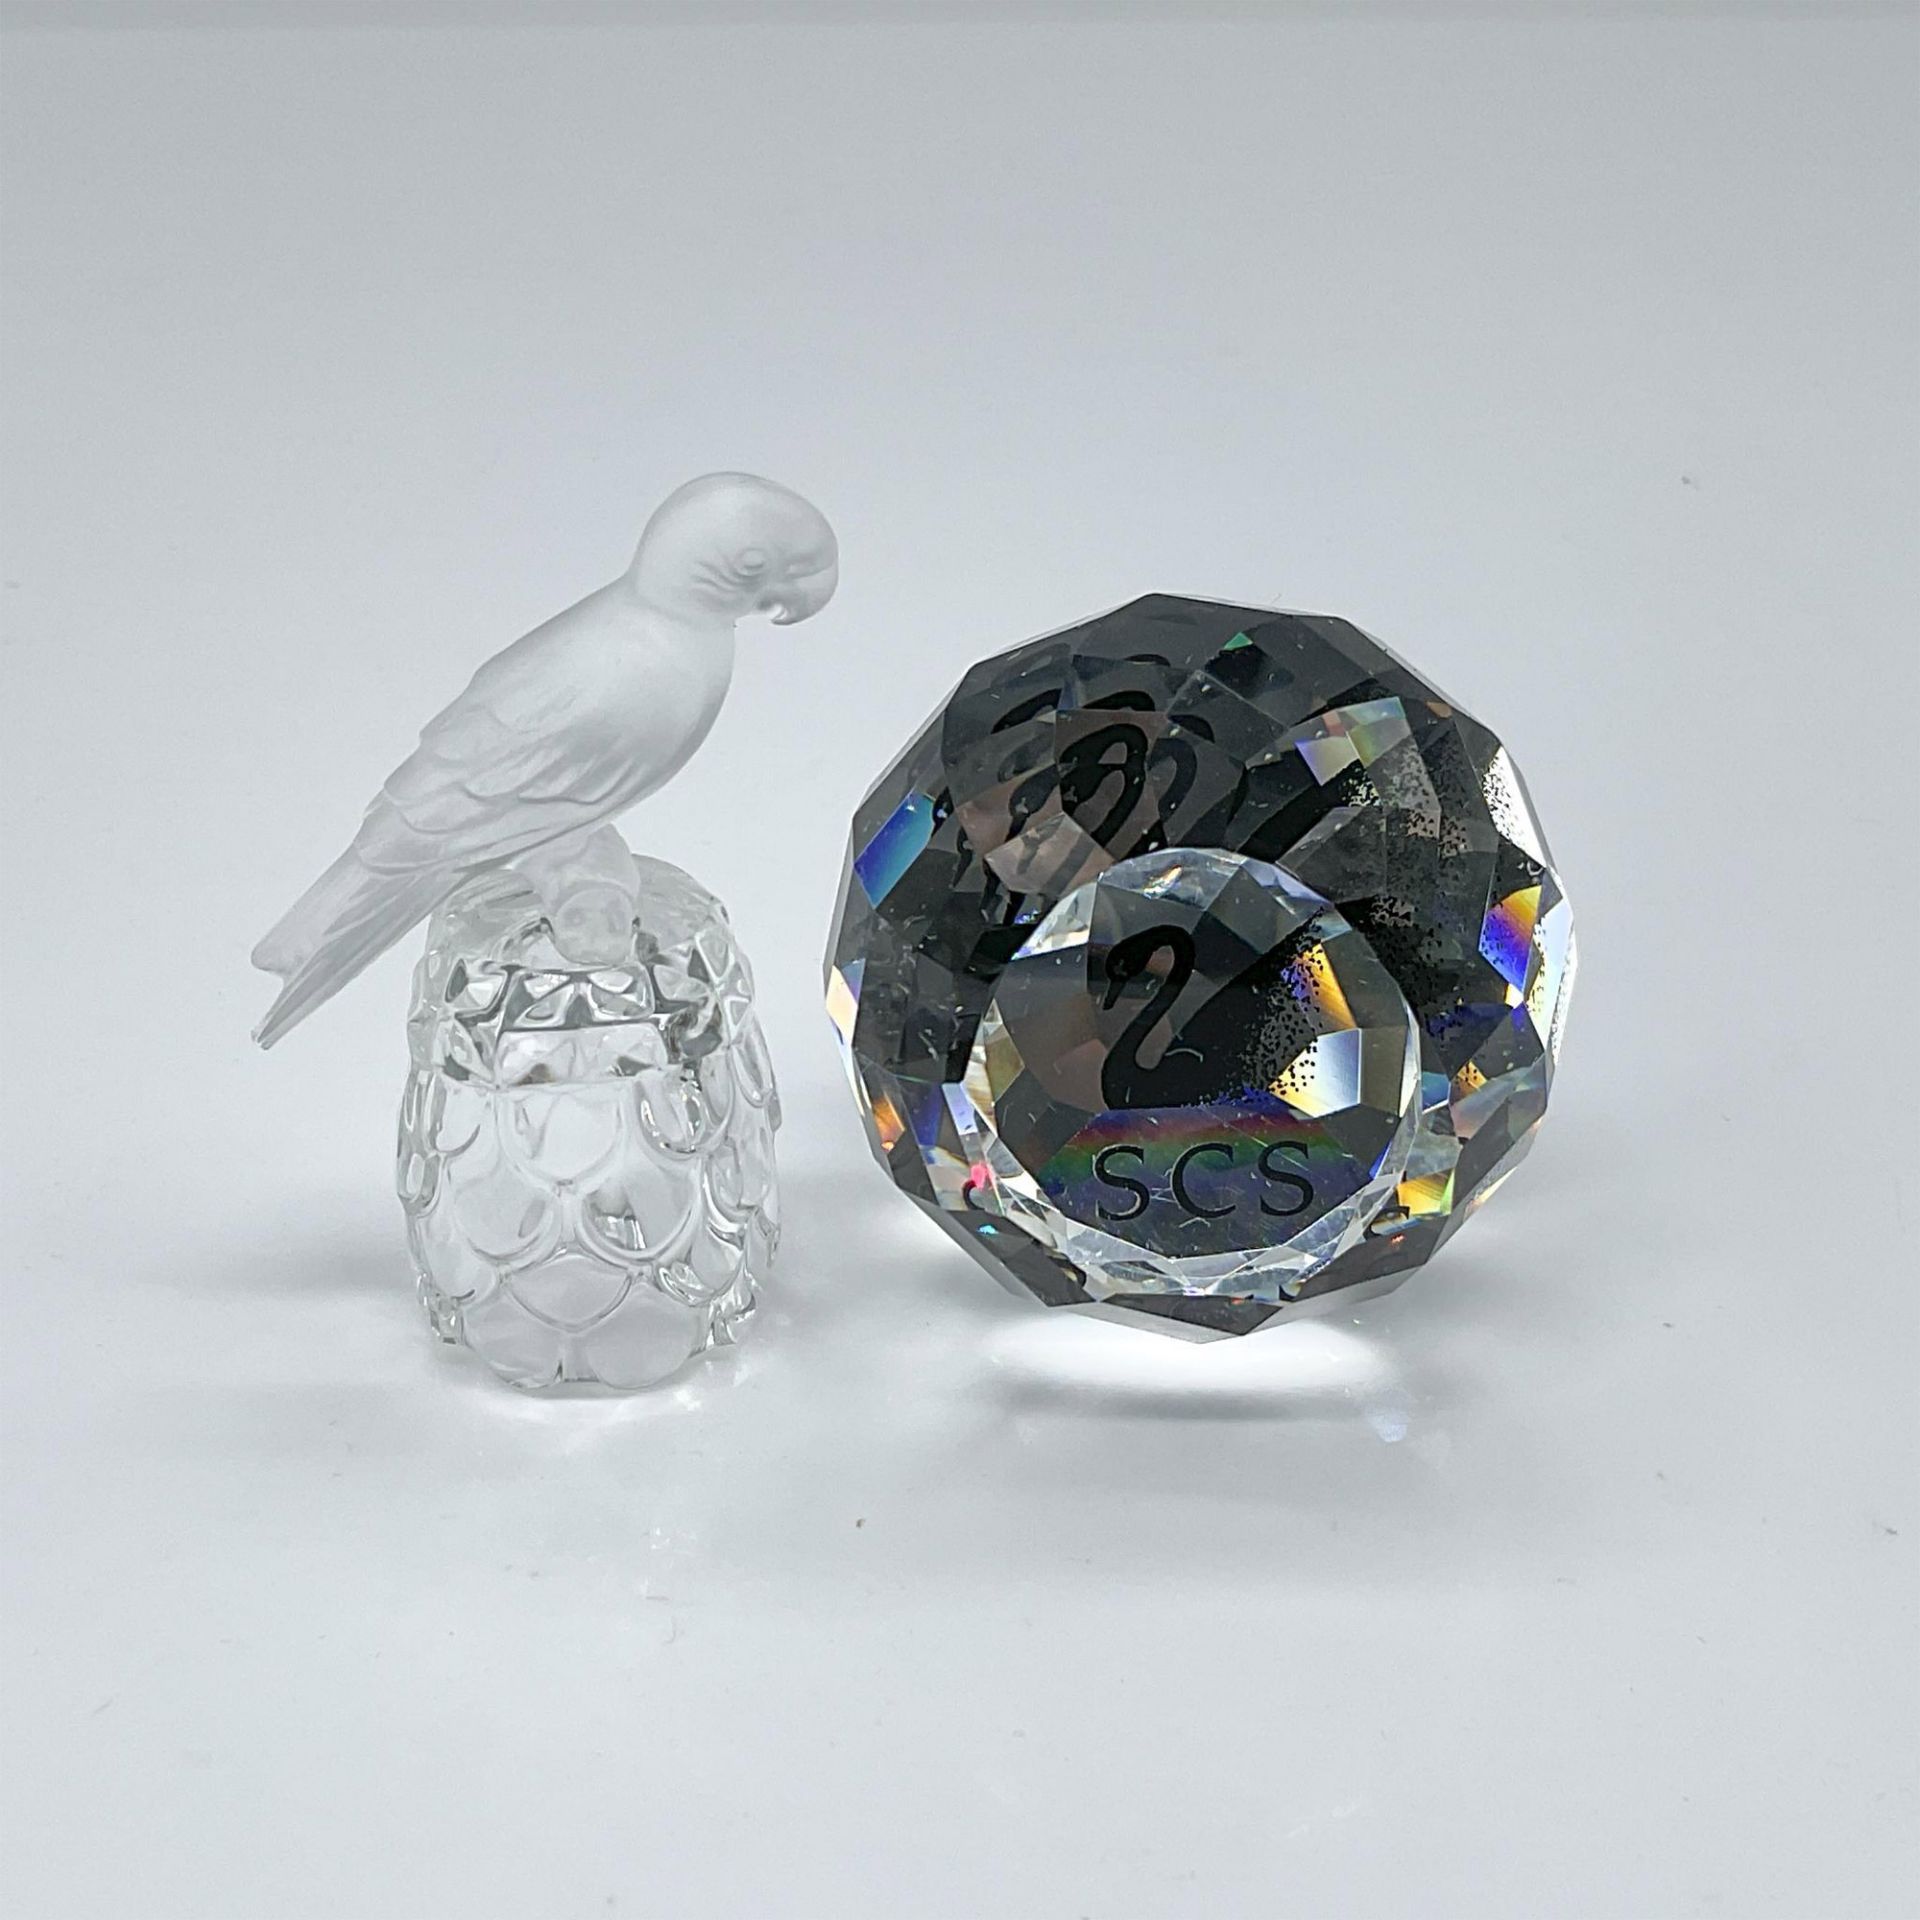 2pc Swarovski Crystal Figurines, Parrot Thimble, Paperweight